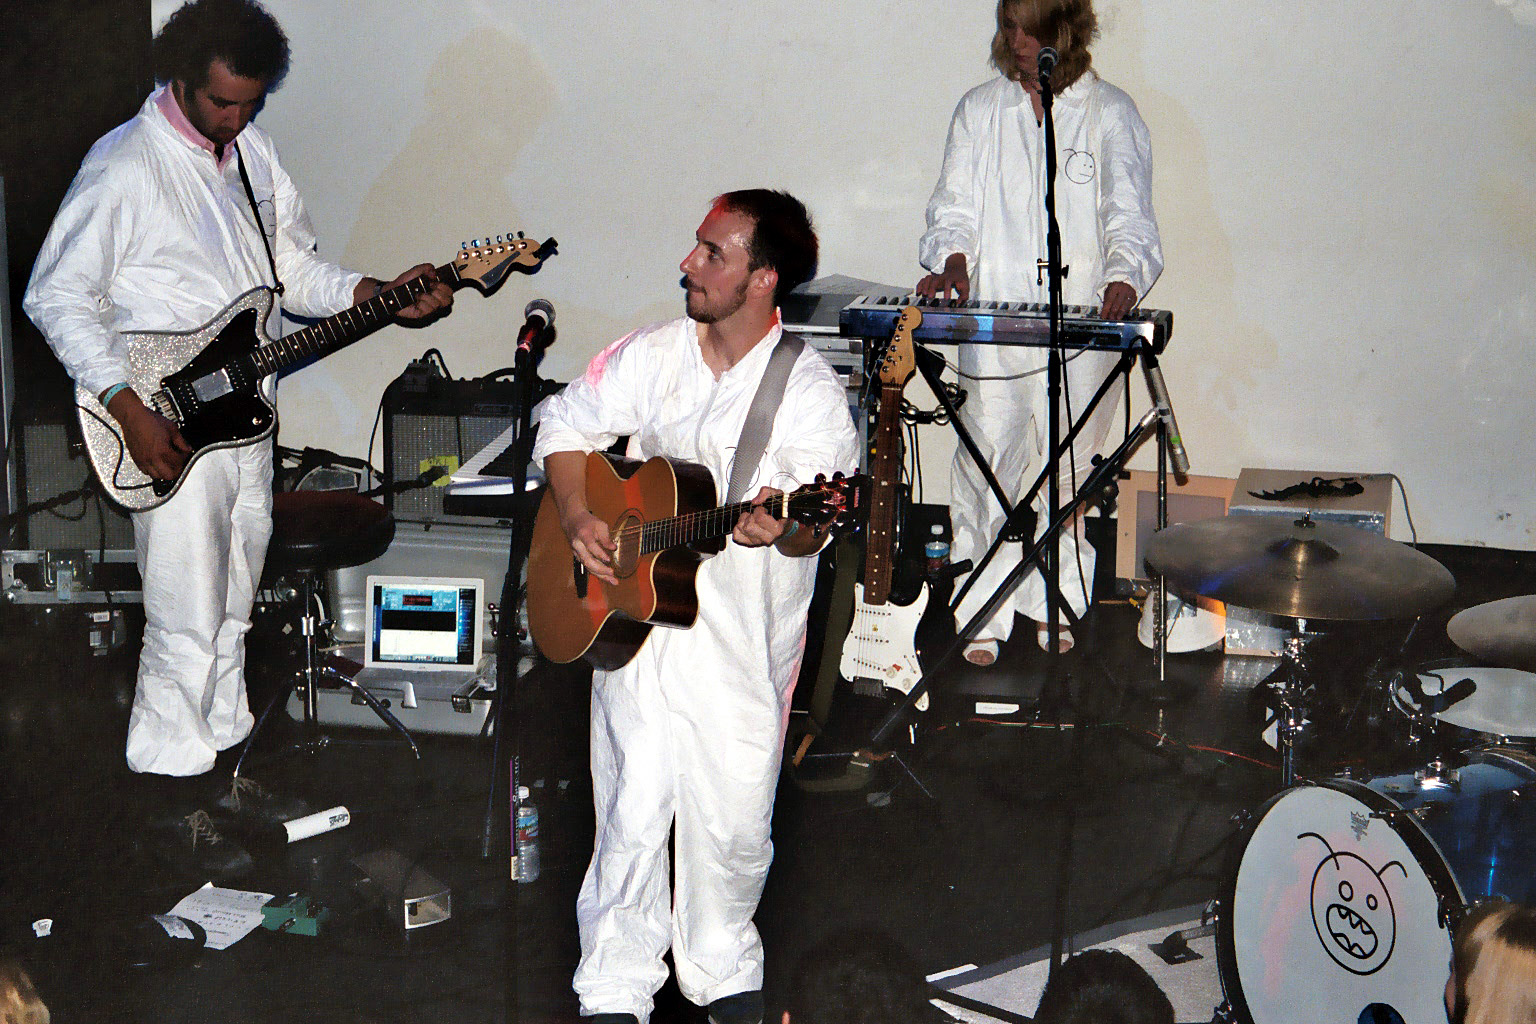 Burns with his band on stage.